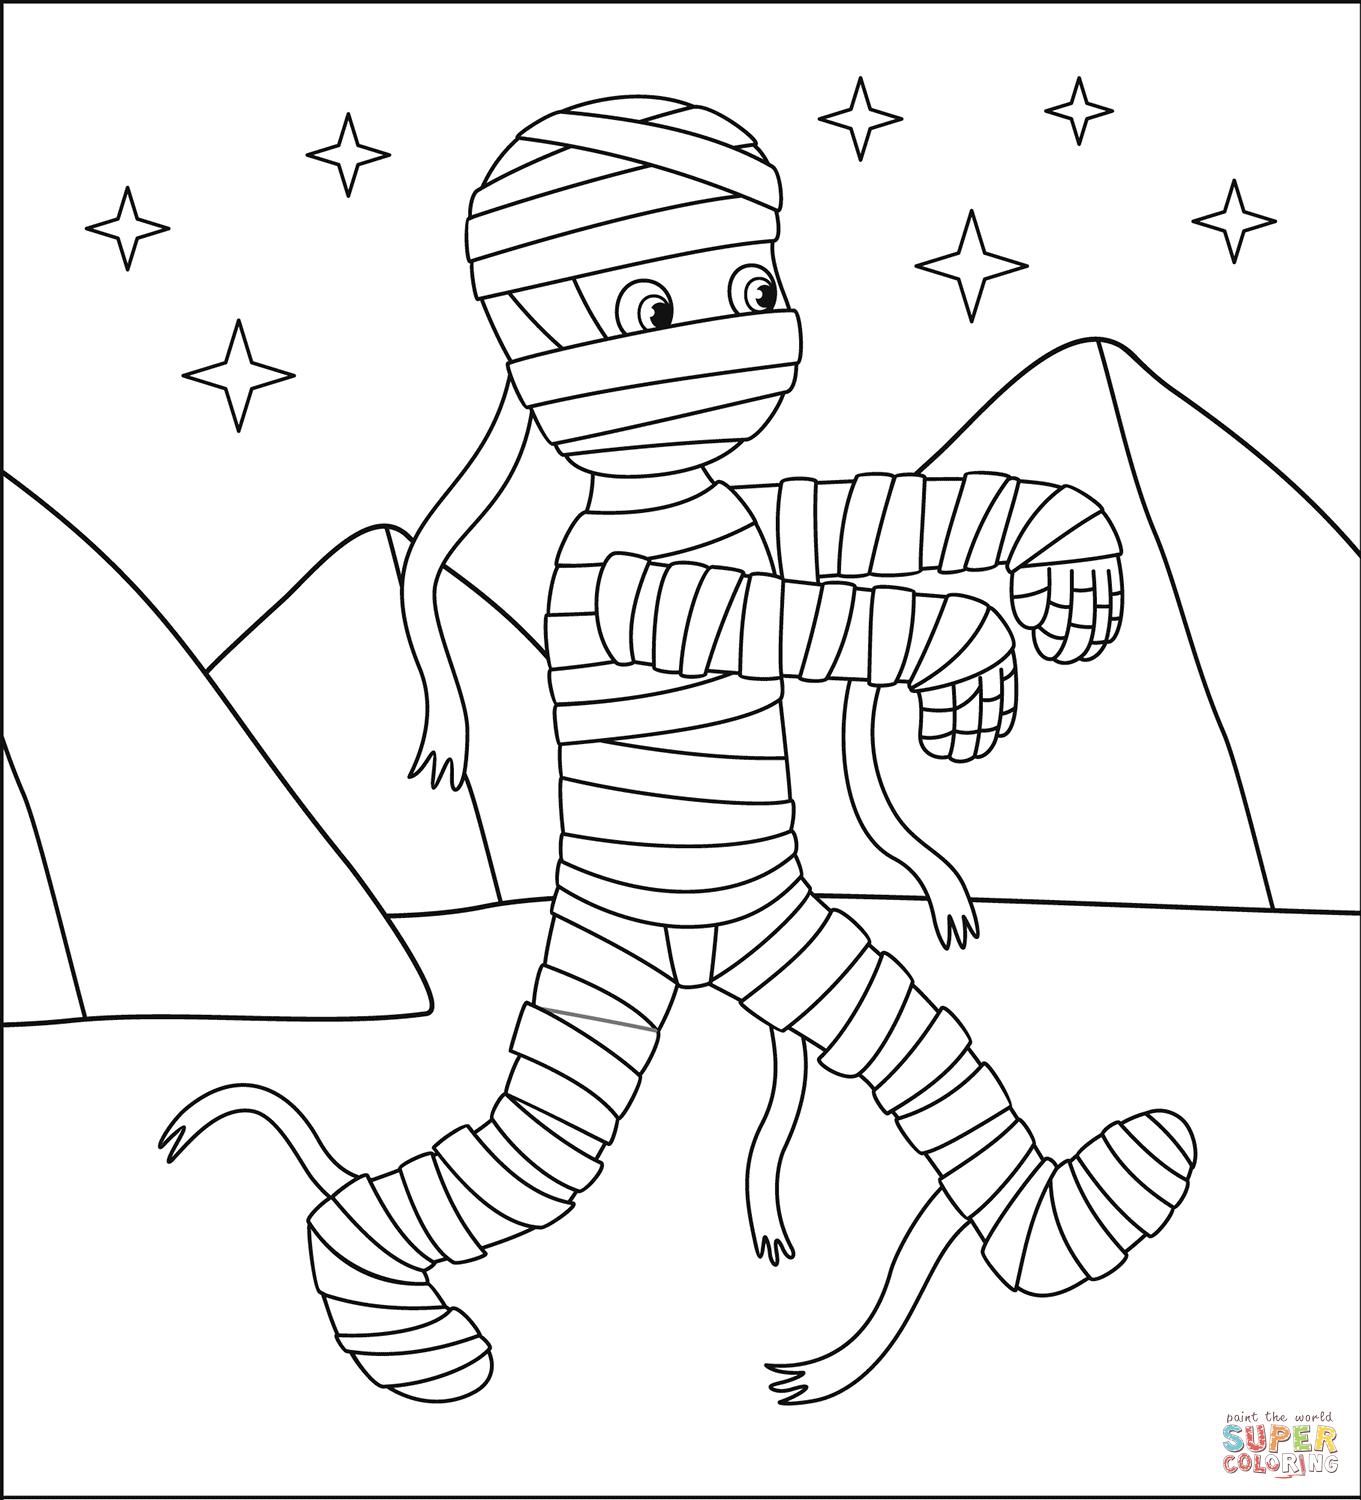 Mummy coloring page free printable coloring pages